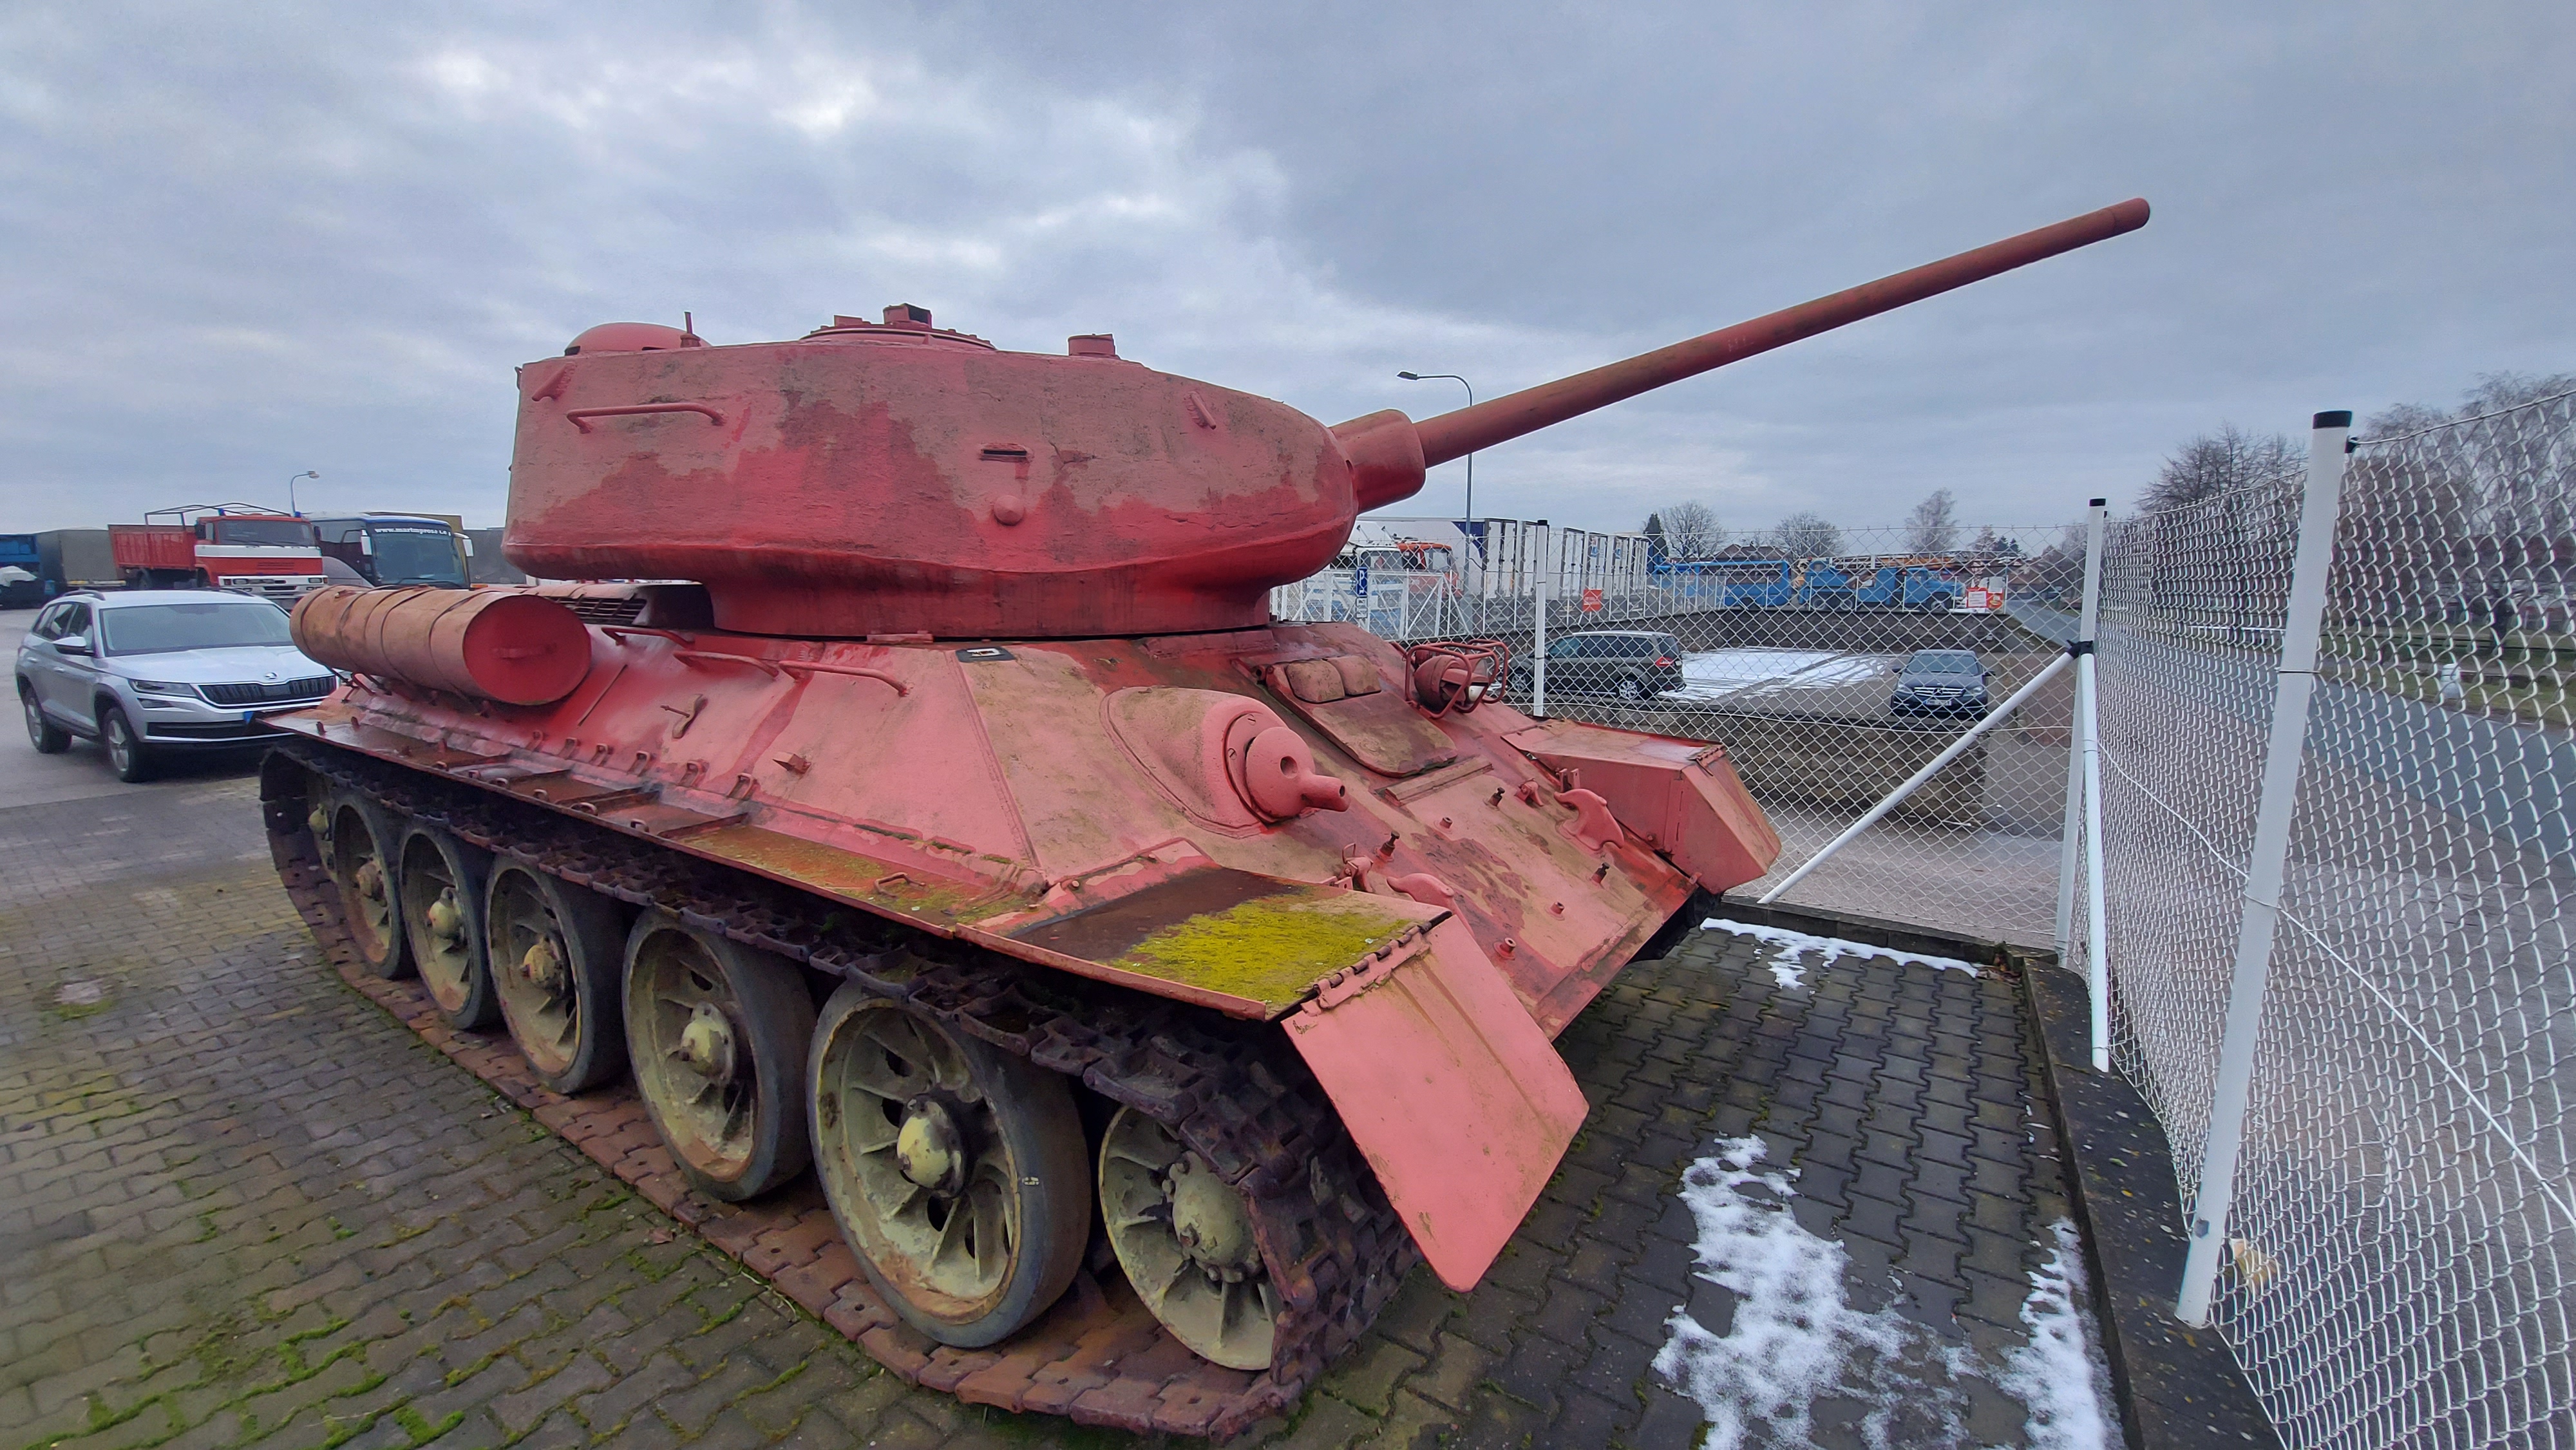 Pink Tank in South London. It's a Russian T34 mark 85 made in 1944.